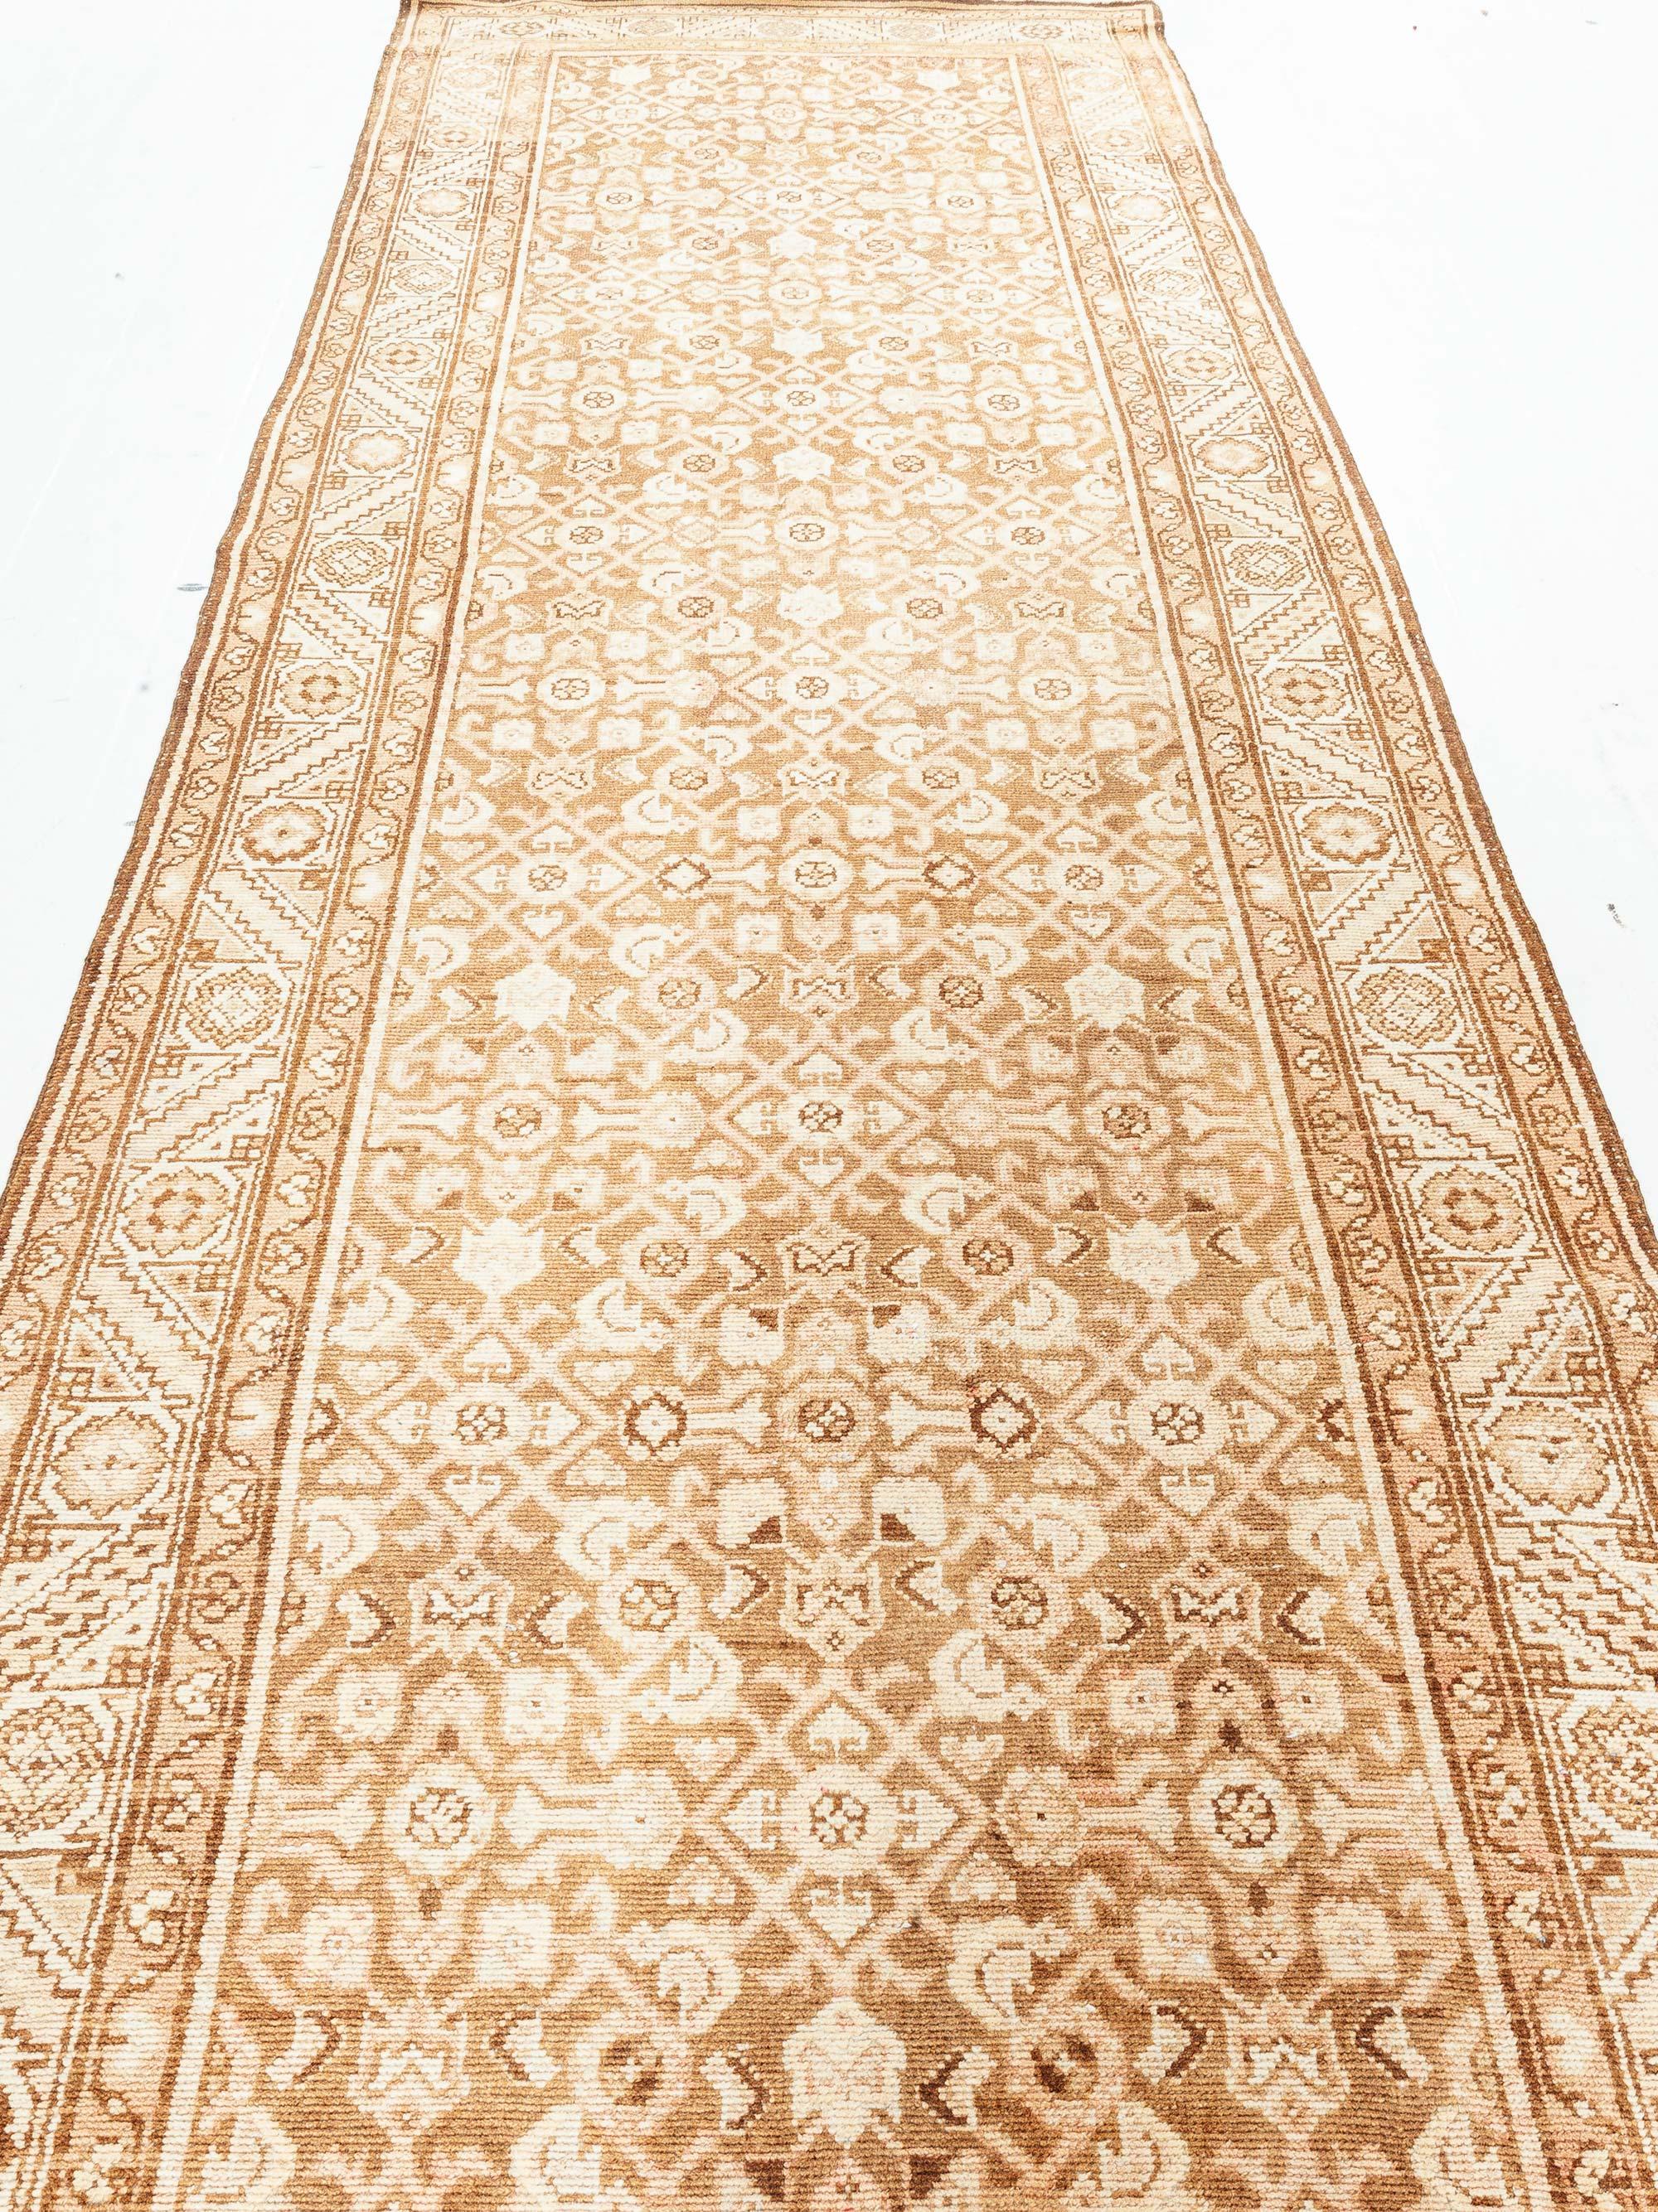 Antique Persian Malayer Runner
Size: 4'0